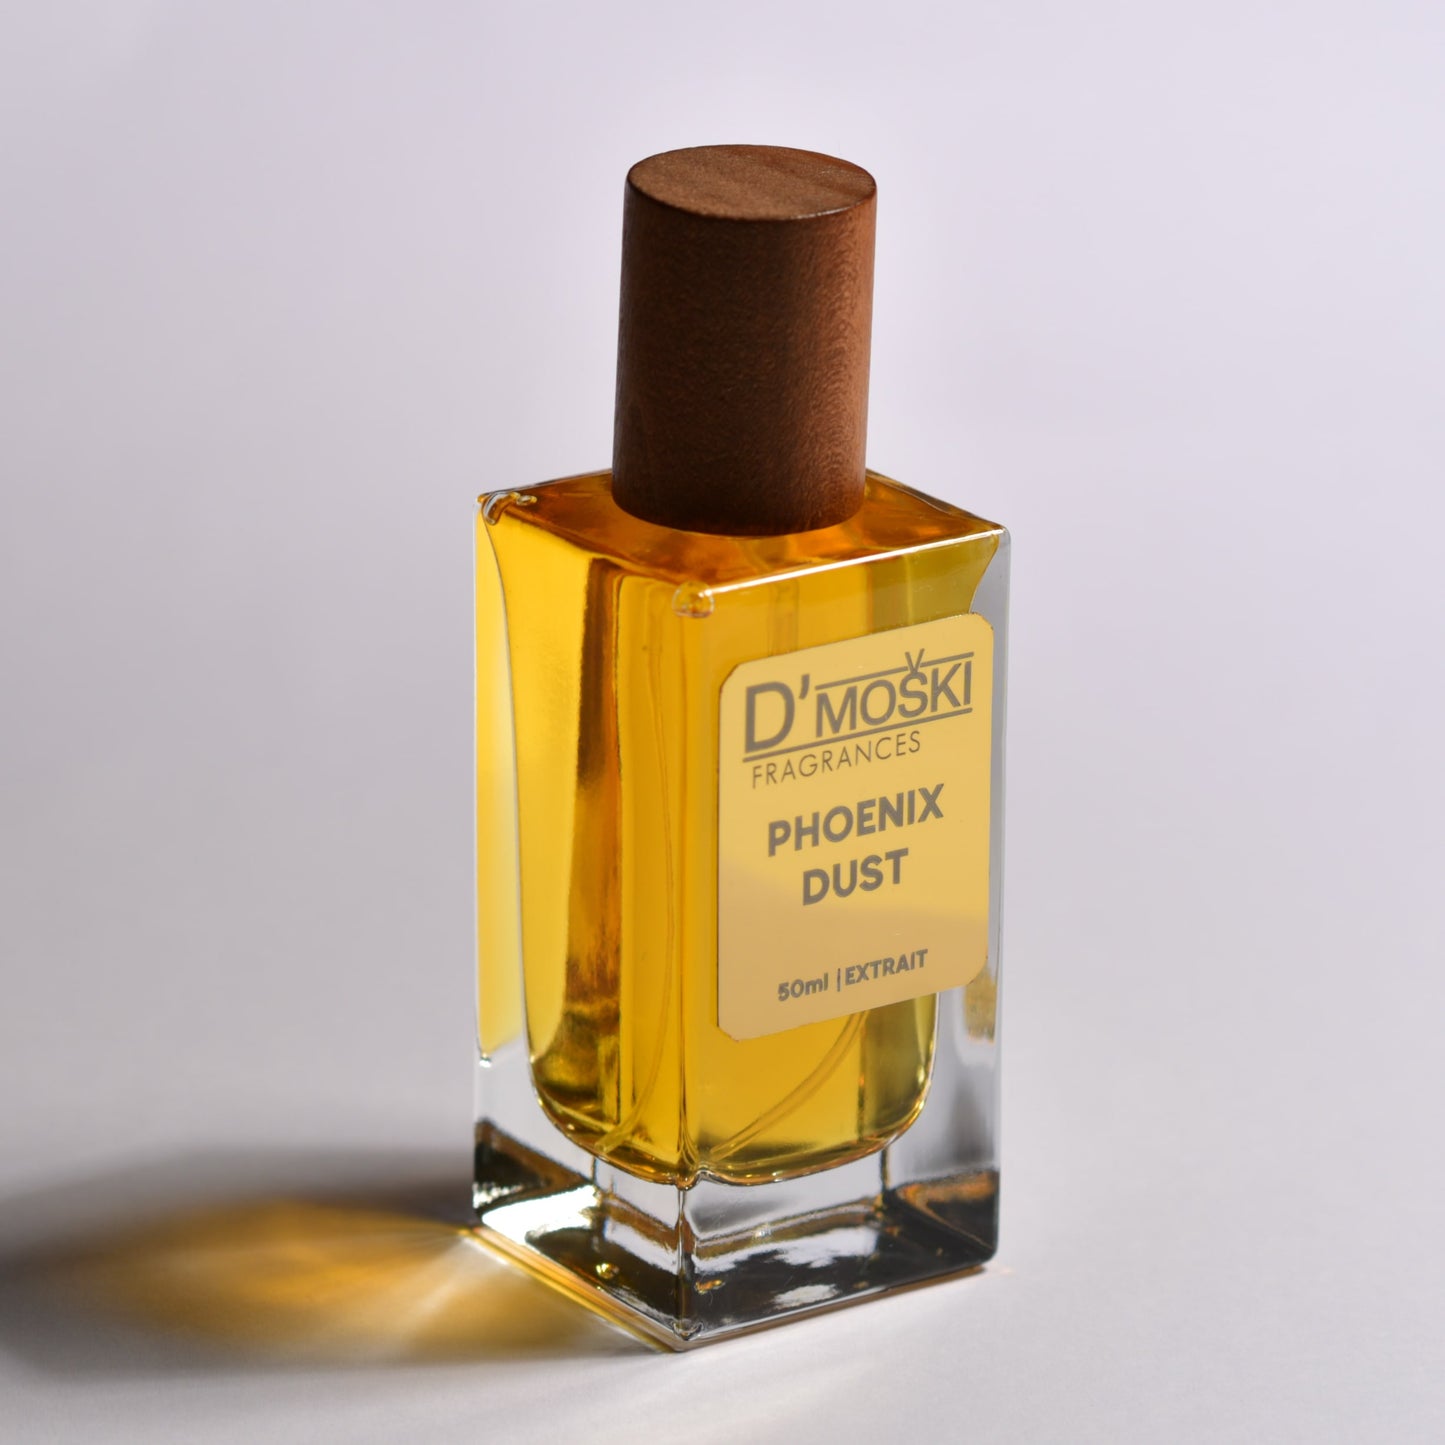 Phoenix Dust - Olfactive Direction: Tobacco Oud by Tom Ford – D'MOSKI